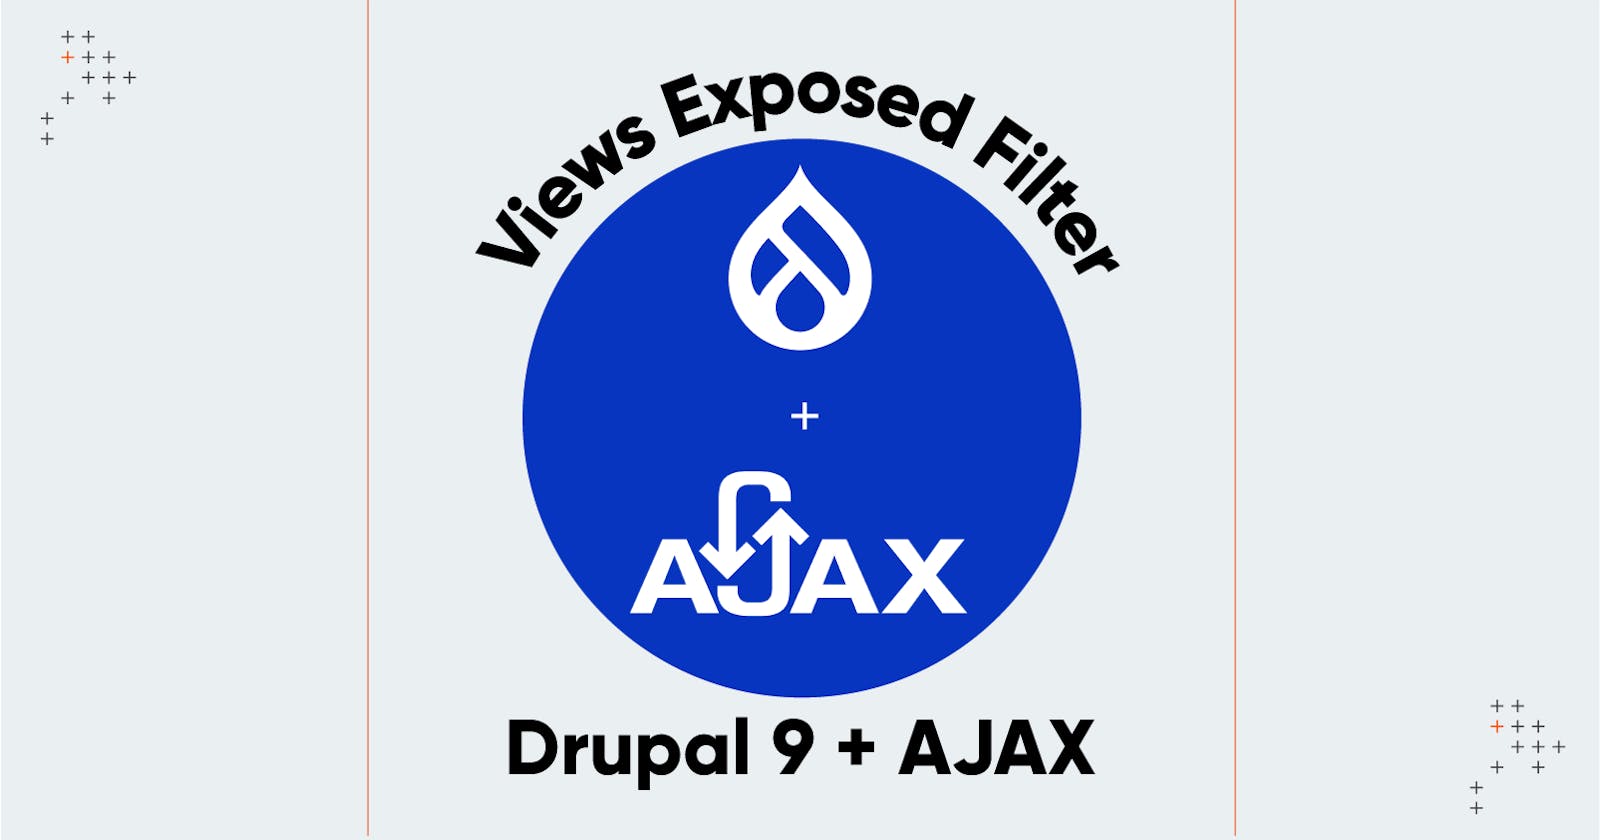 How To Make A Drupal 9 Select Filter In Views Exposed Filter Dependent On Another Via AJAX